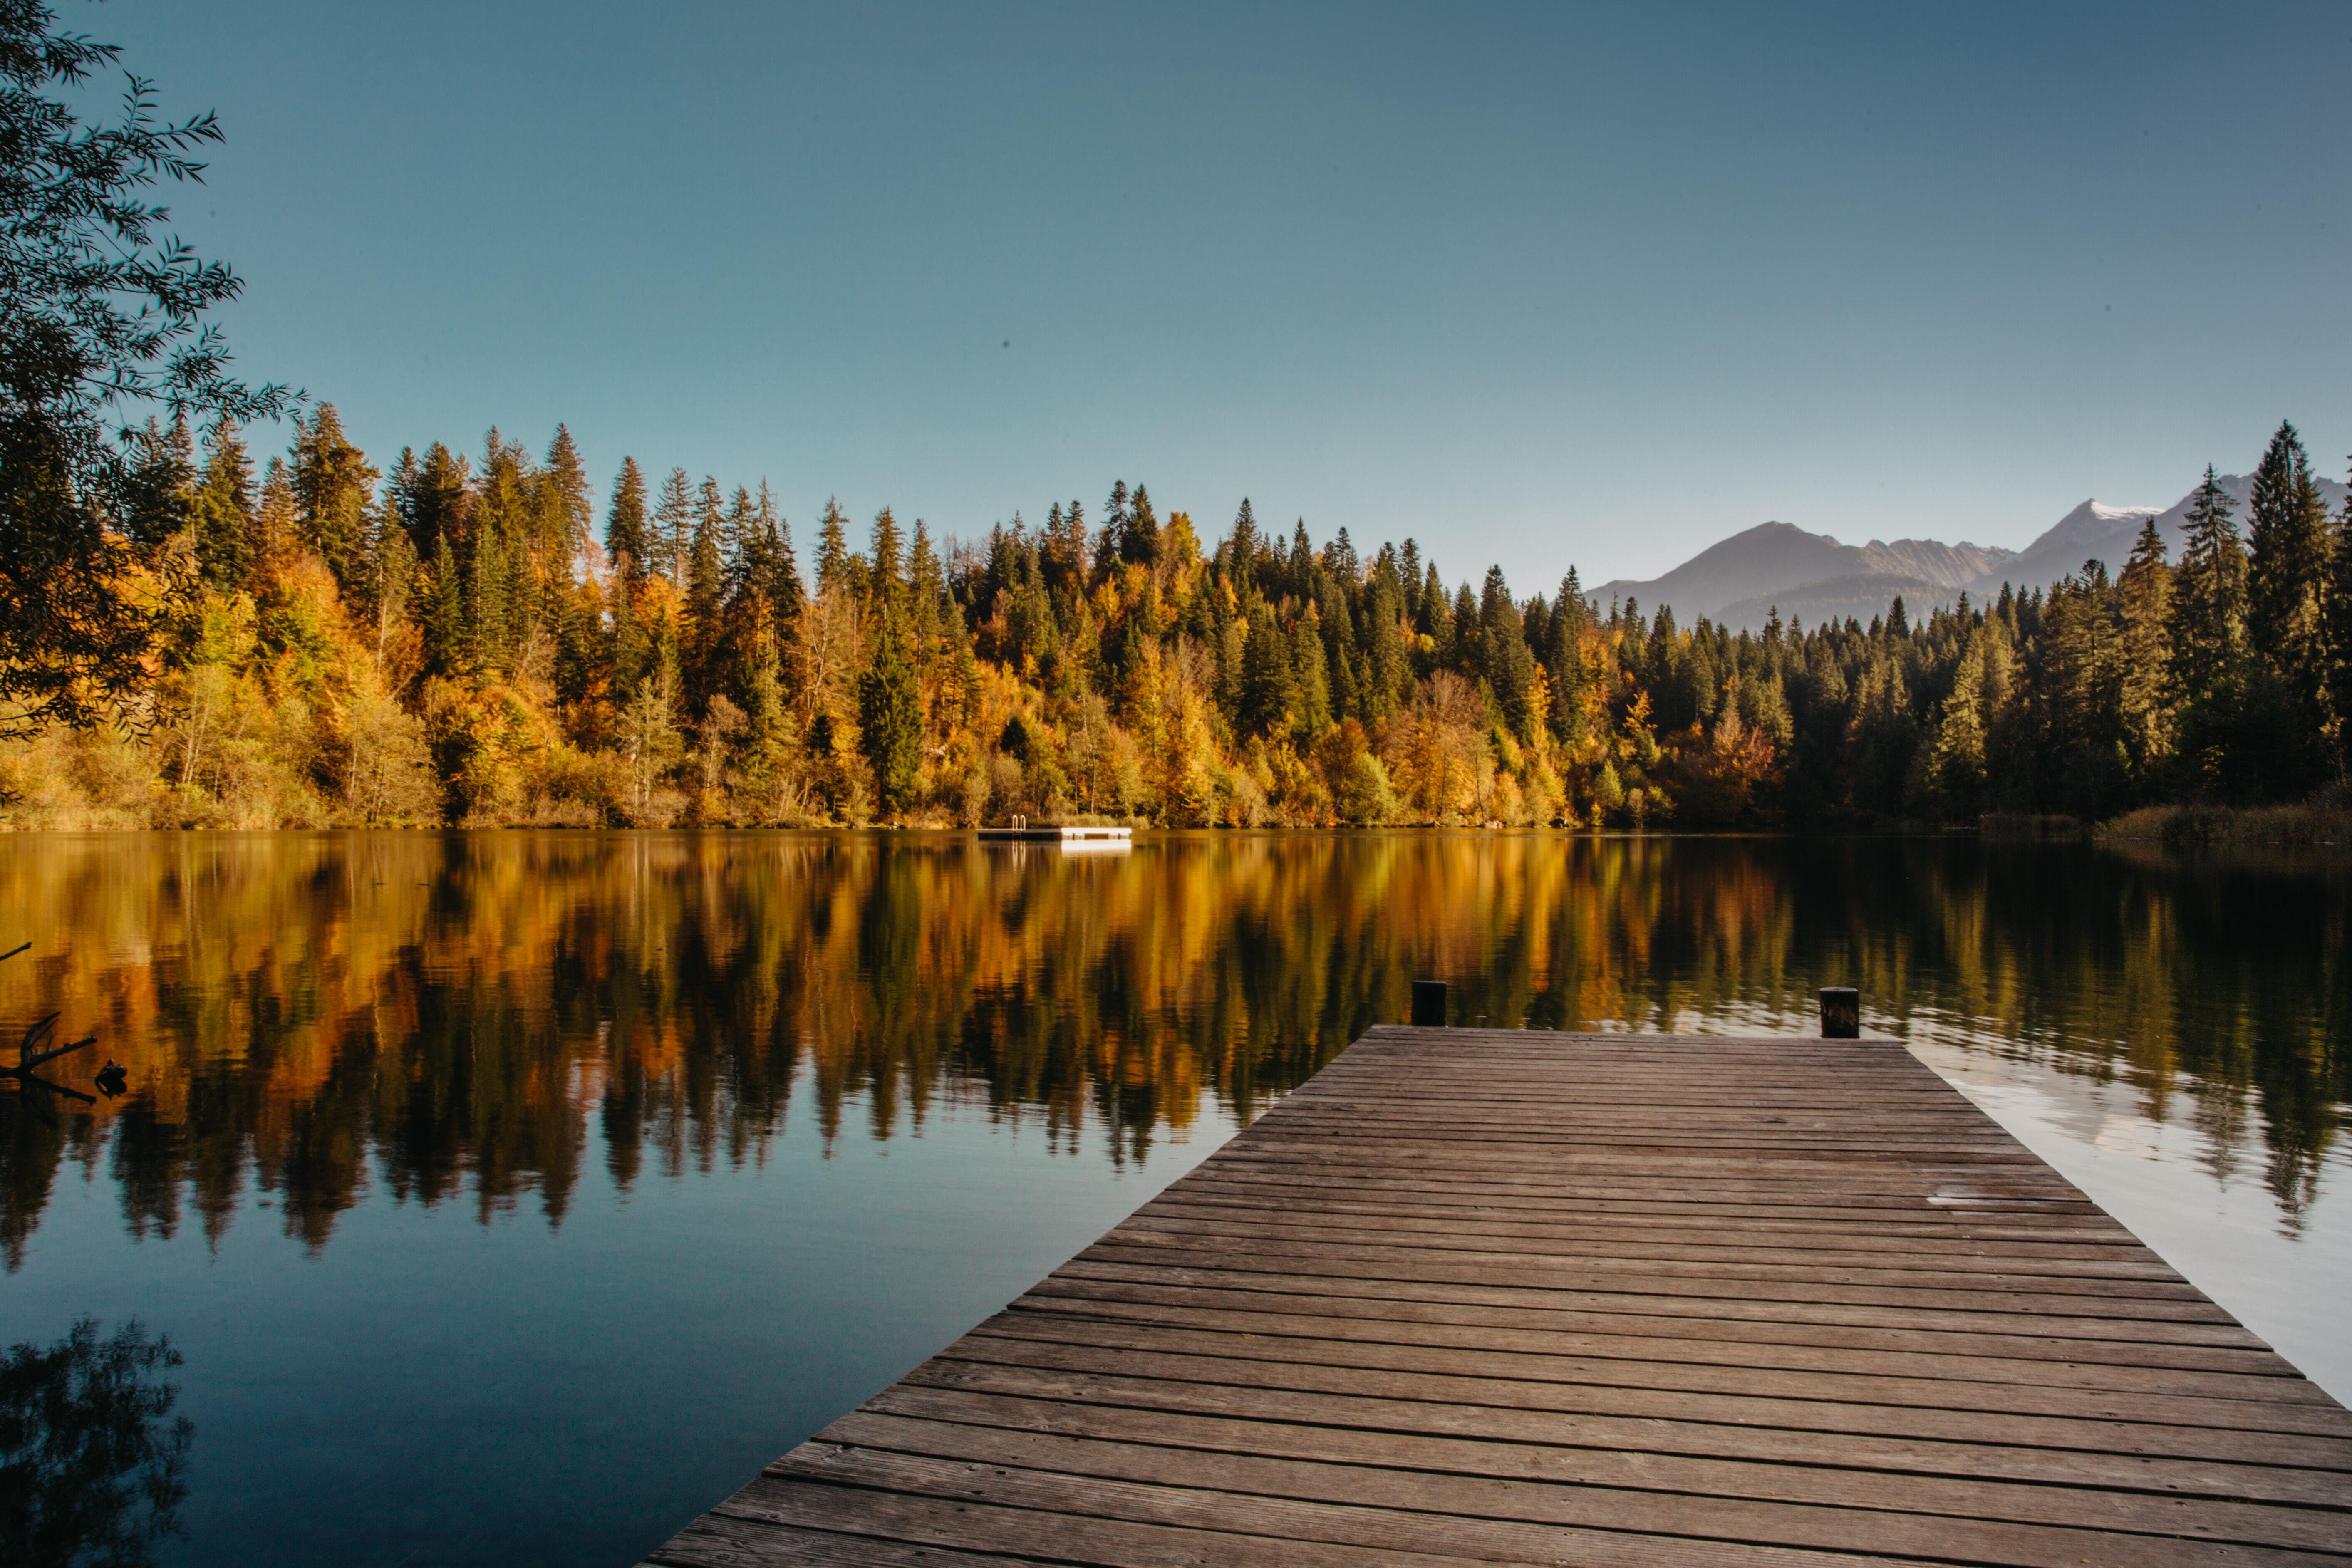 Photo of a dock on a calm lake, surrounded by trees in fall colours, mountains in the background.